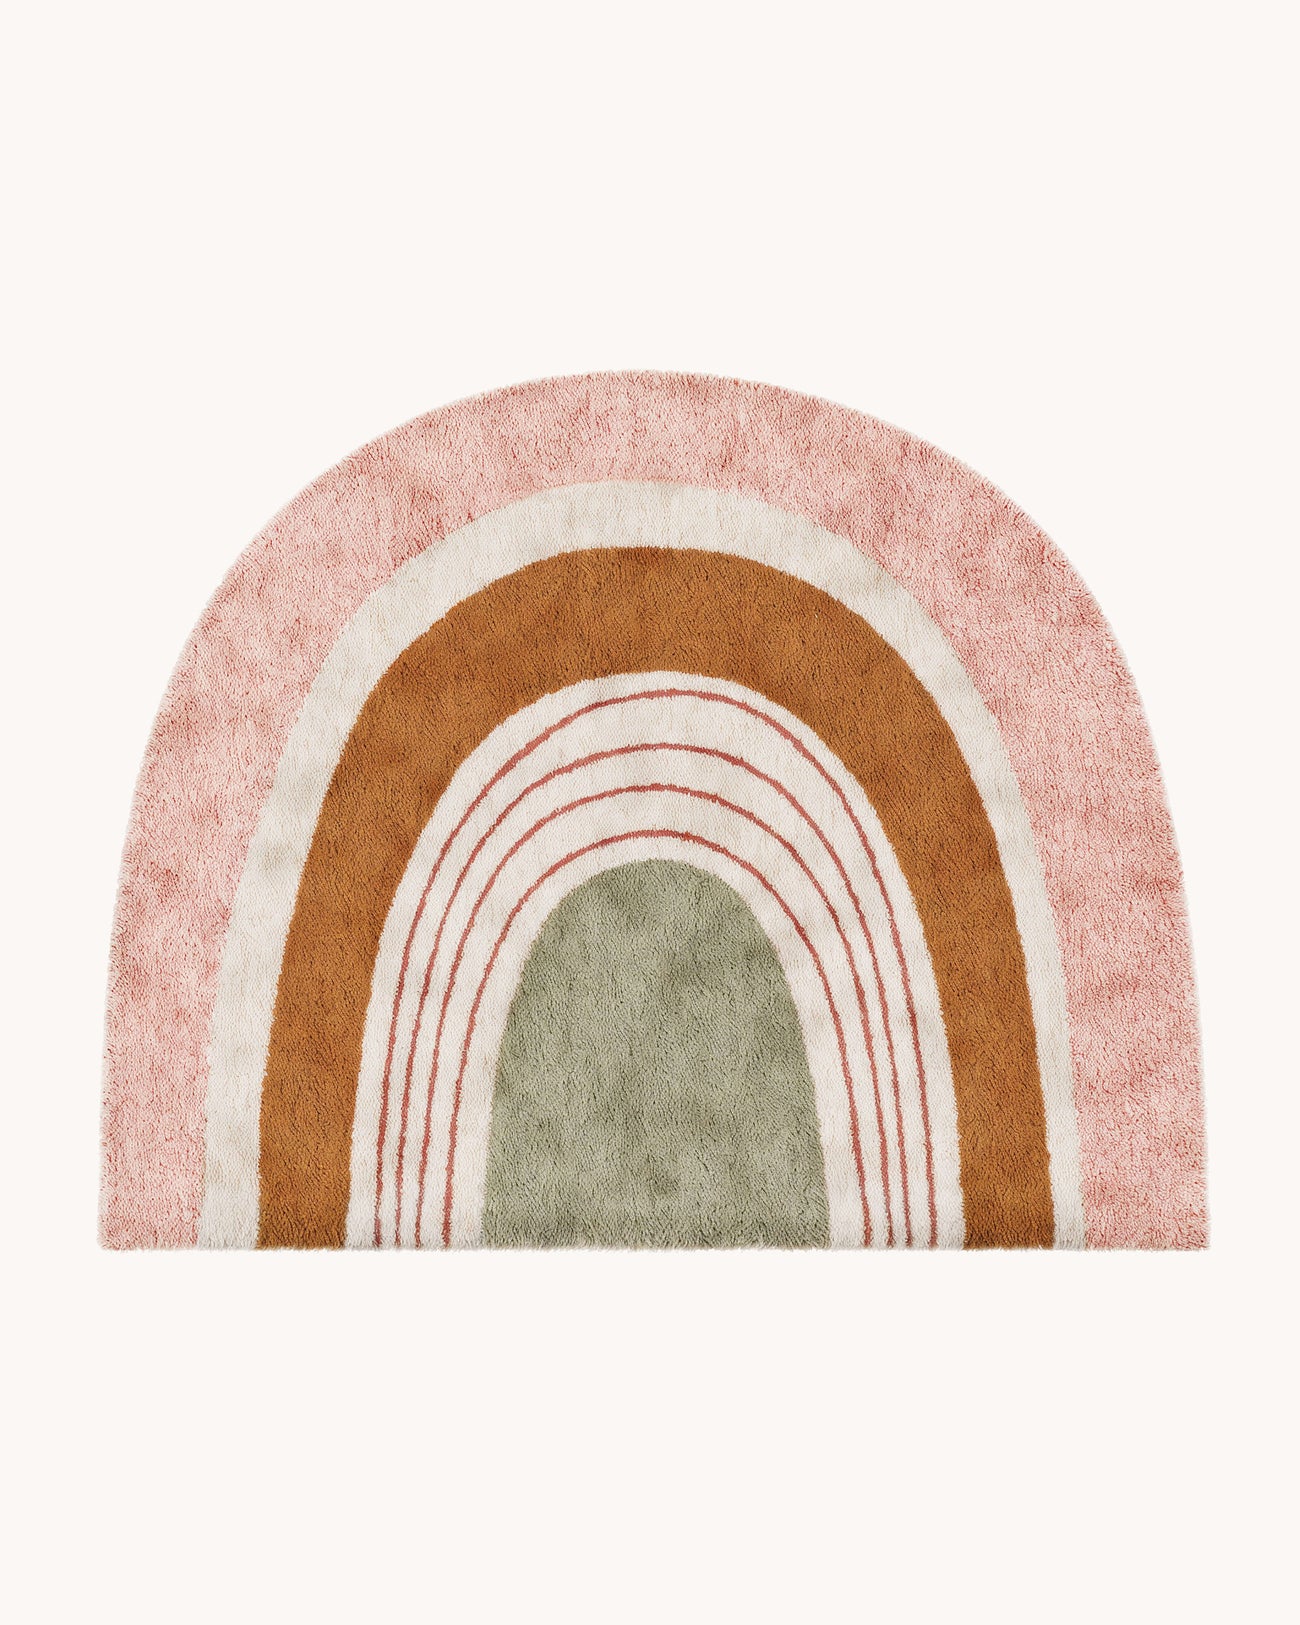 Arches Rug